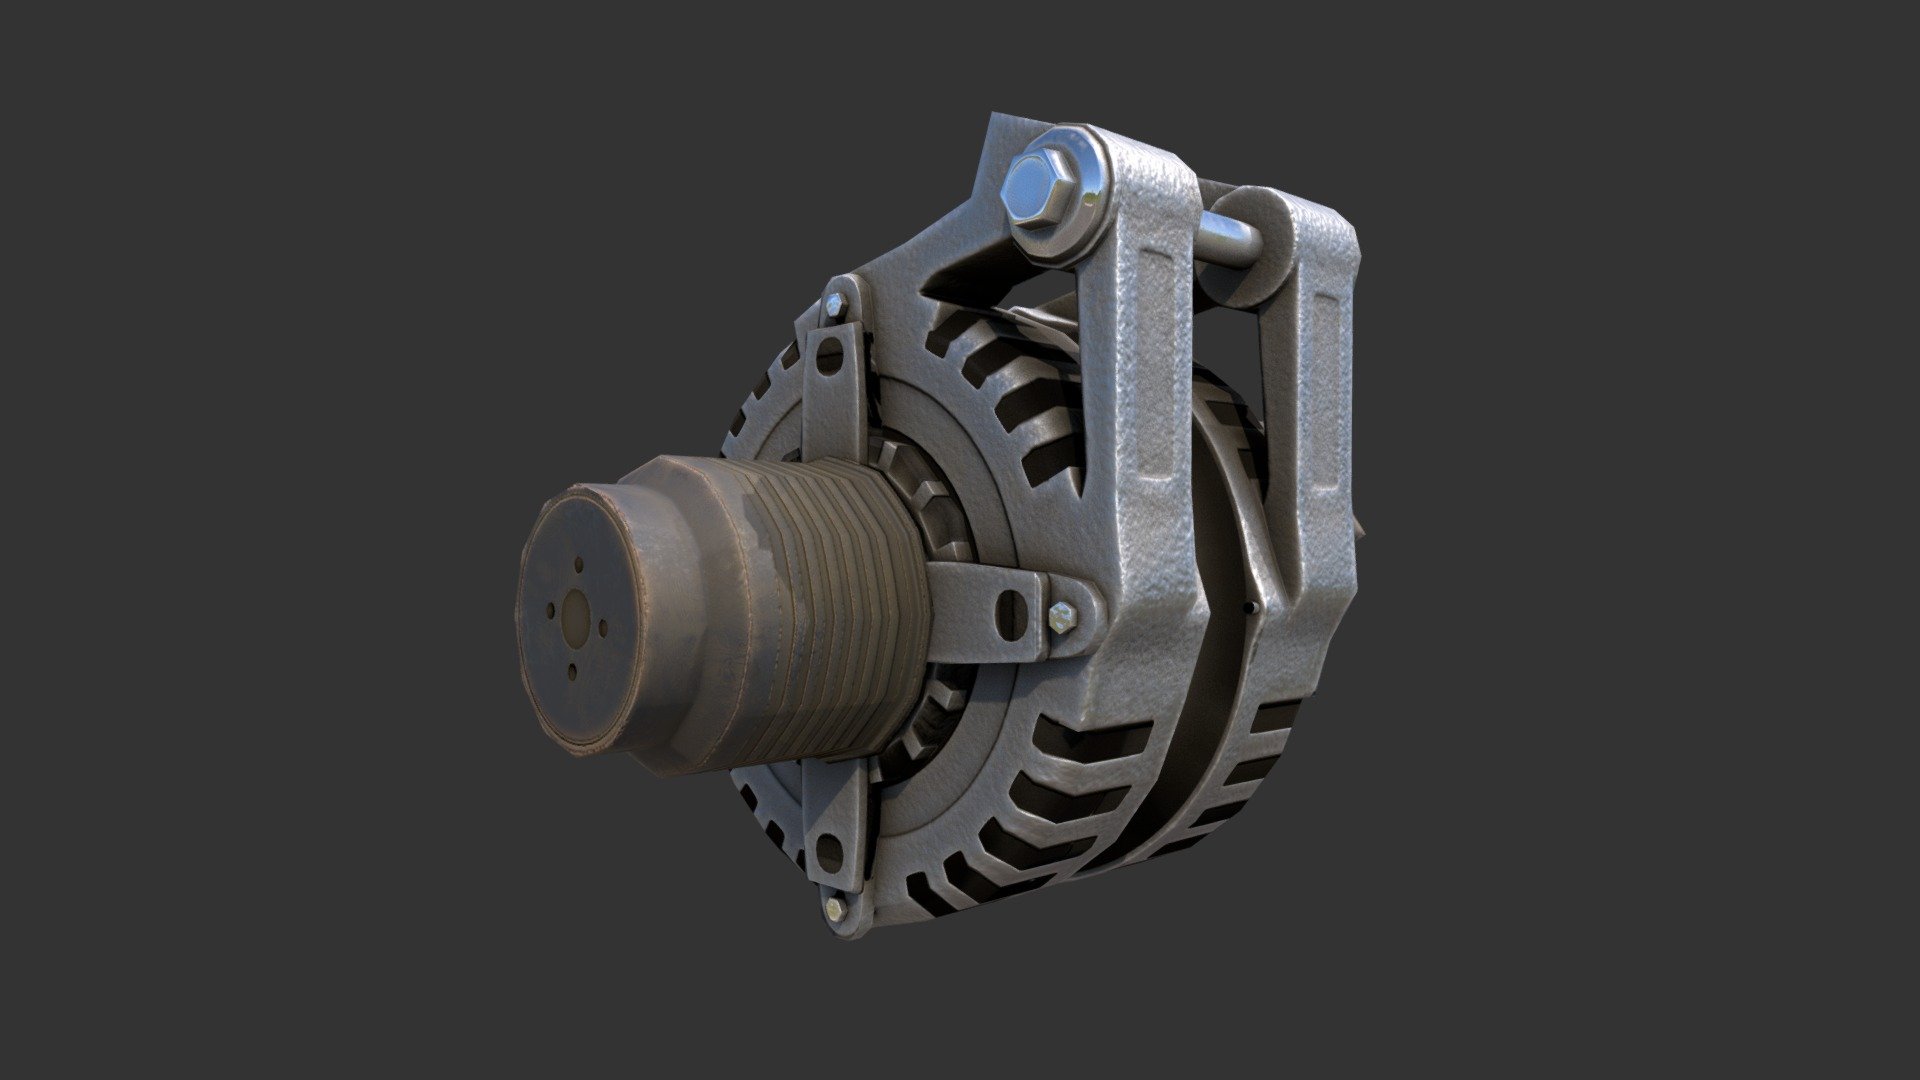 A piece off of an engine, made as hardsurface/retopology practice. Making little doodads like this is often fun, even if the models themselves aren't often all that useful.

Made with 3DSmax and Substance Painter - Electric Dynamo/Alternator - 3D model by Renafox (@kryik1023) 3d model